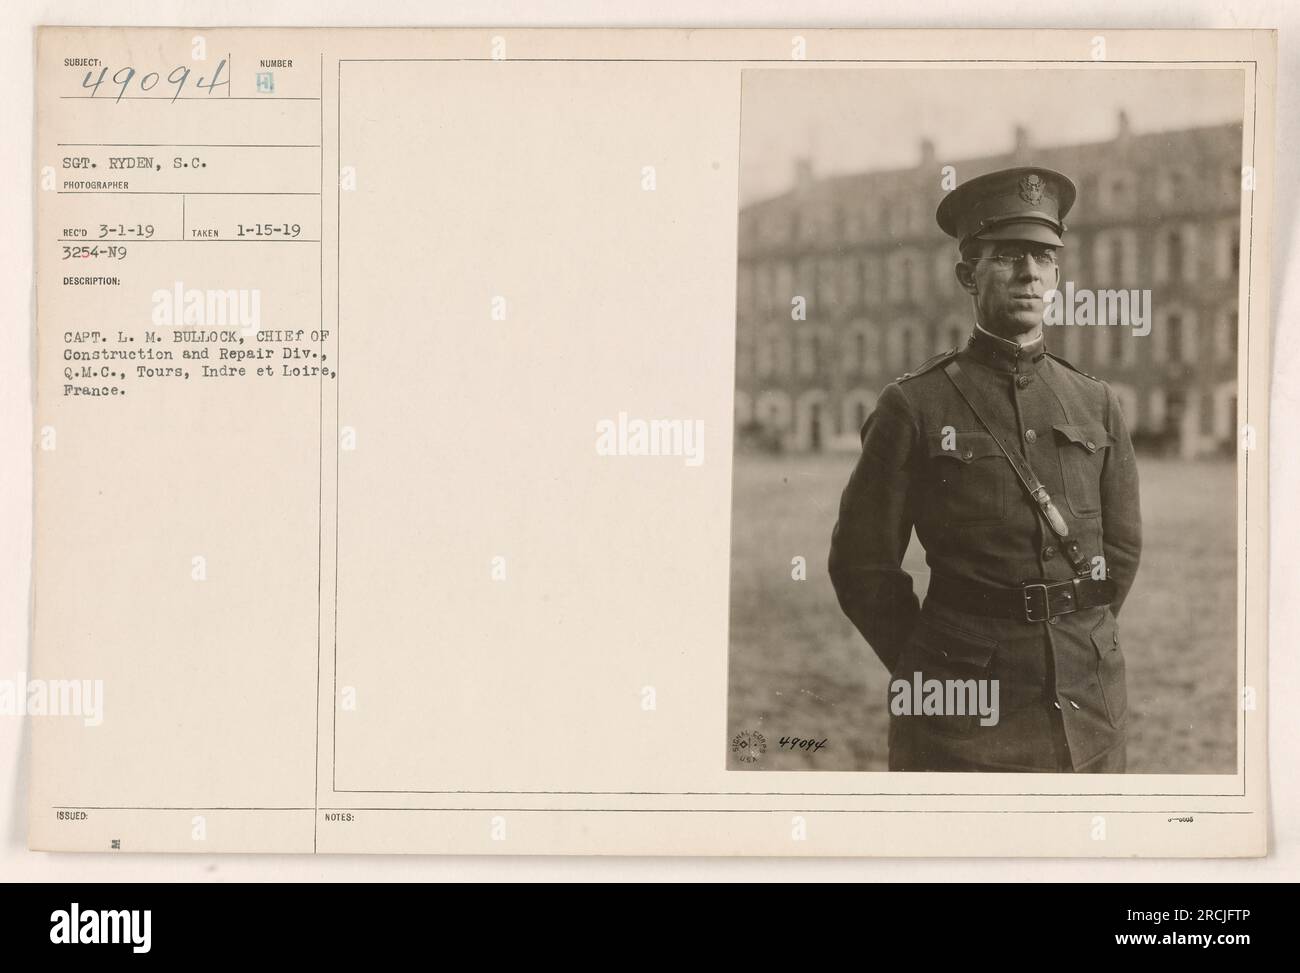 Captain L.M. Bullock, Chief of Construction and Repair Division, Q.M.C., Tours, Indre et Loire, France. Sergeant Ryden, S.C. photographer, captured this image on January 15, 1919. The photograph has a reference number of 3254-N9. Captain Bullock is seen wearing his issued uniform in the picture. Stock Photo